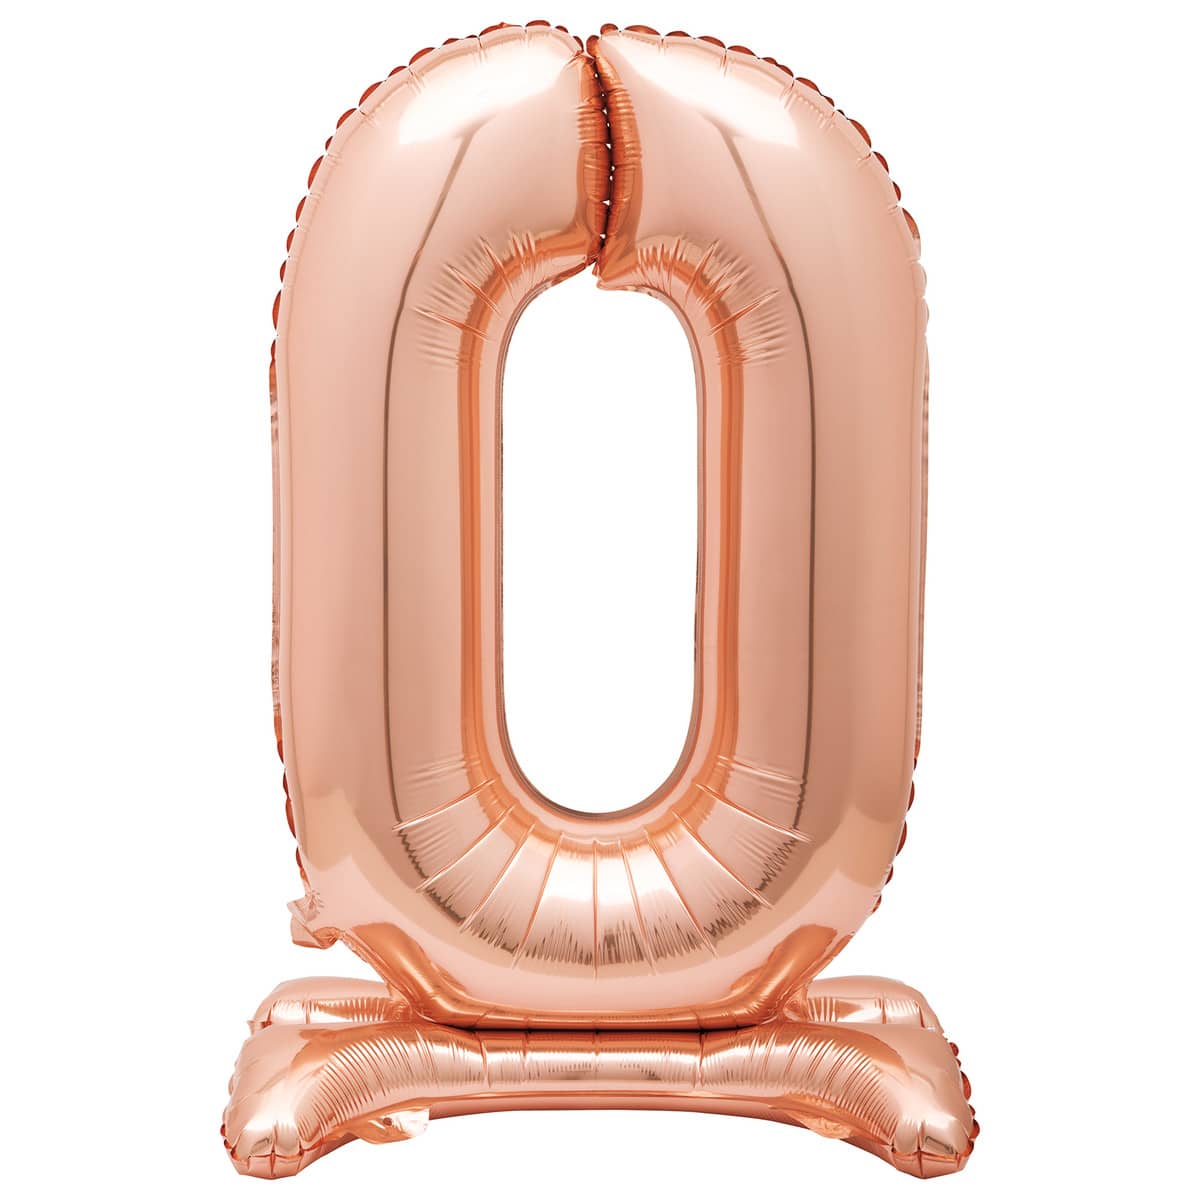 Rose Gold "0" Giant Standing Air Filled Numeral Foil Balloon 76CM (30") - Party Owls